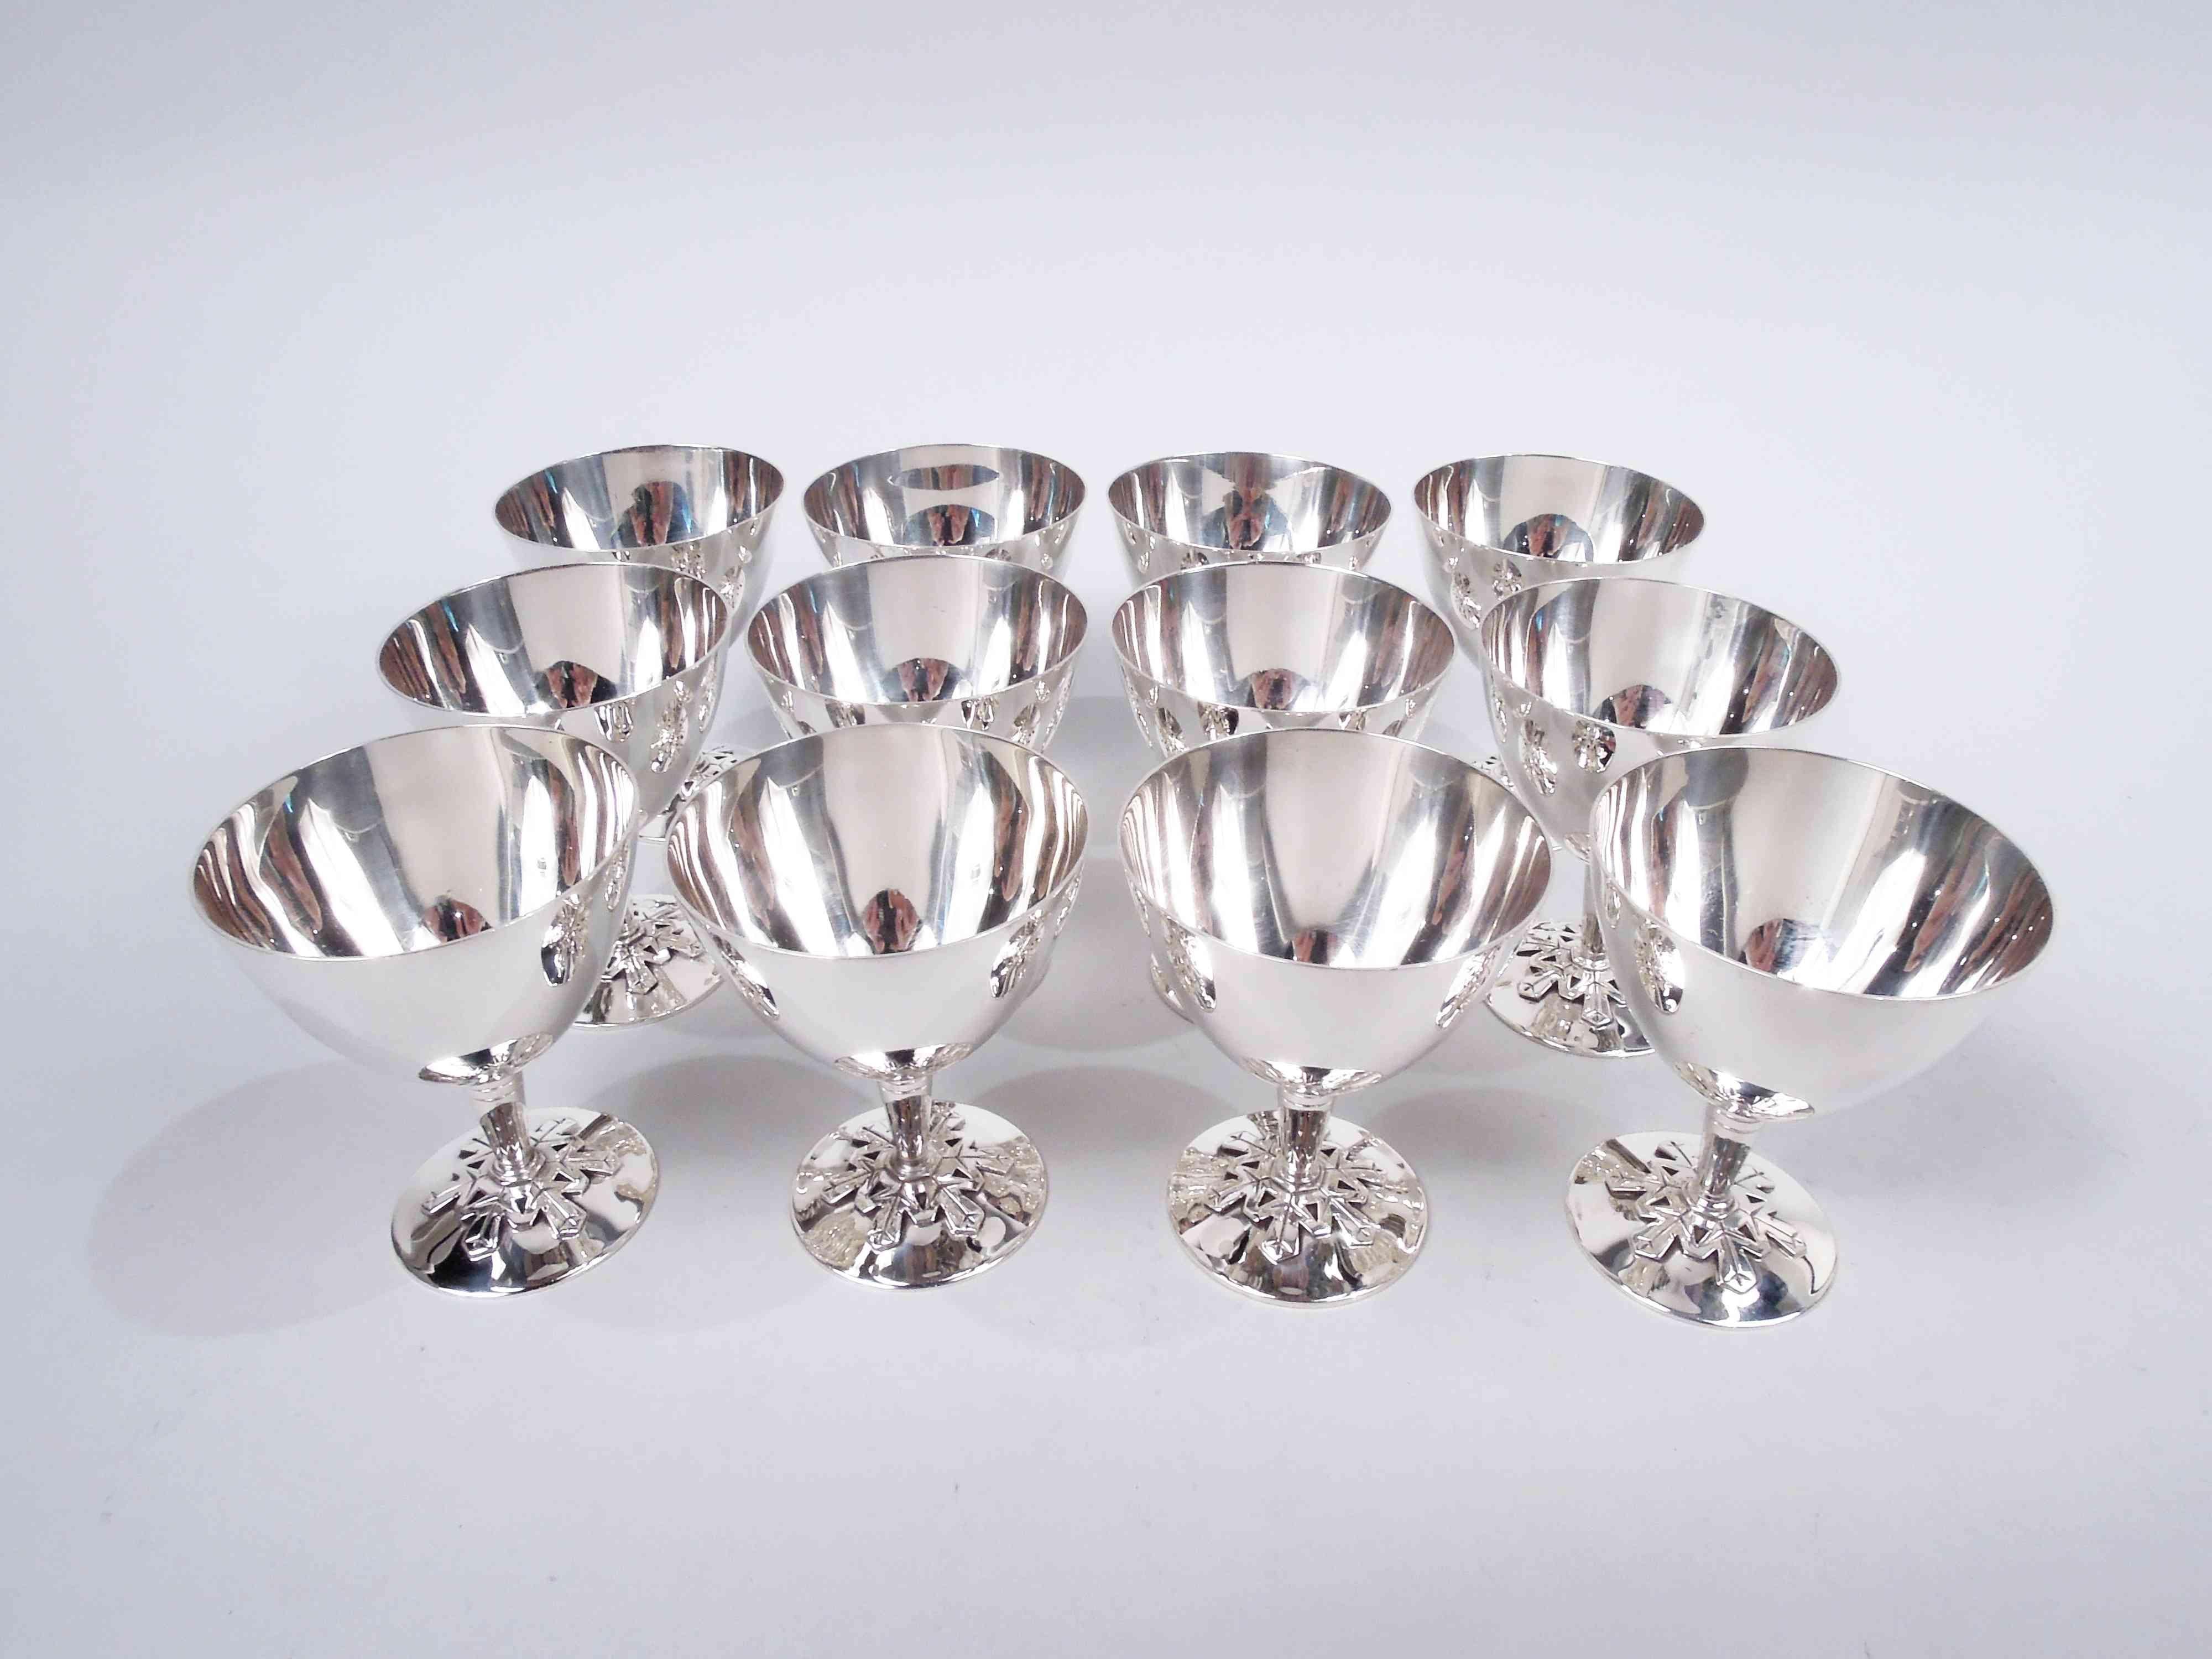 Set of 12 Midcentury Modern sterling silver cocktail cups. Made by Tiffany & Co. in New York. Each: Curved conical bowl on tapering columnar stem with incised bands. Foot round and raised with applied cutout snowflake. A snowflake motif but not for